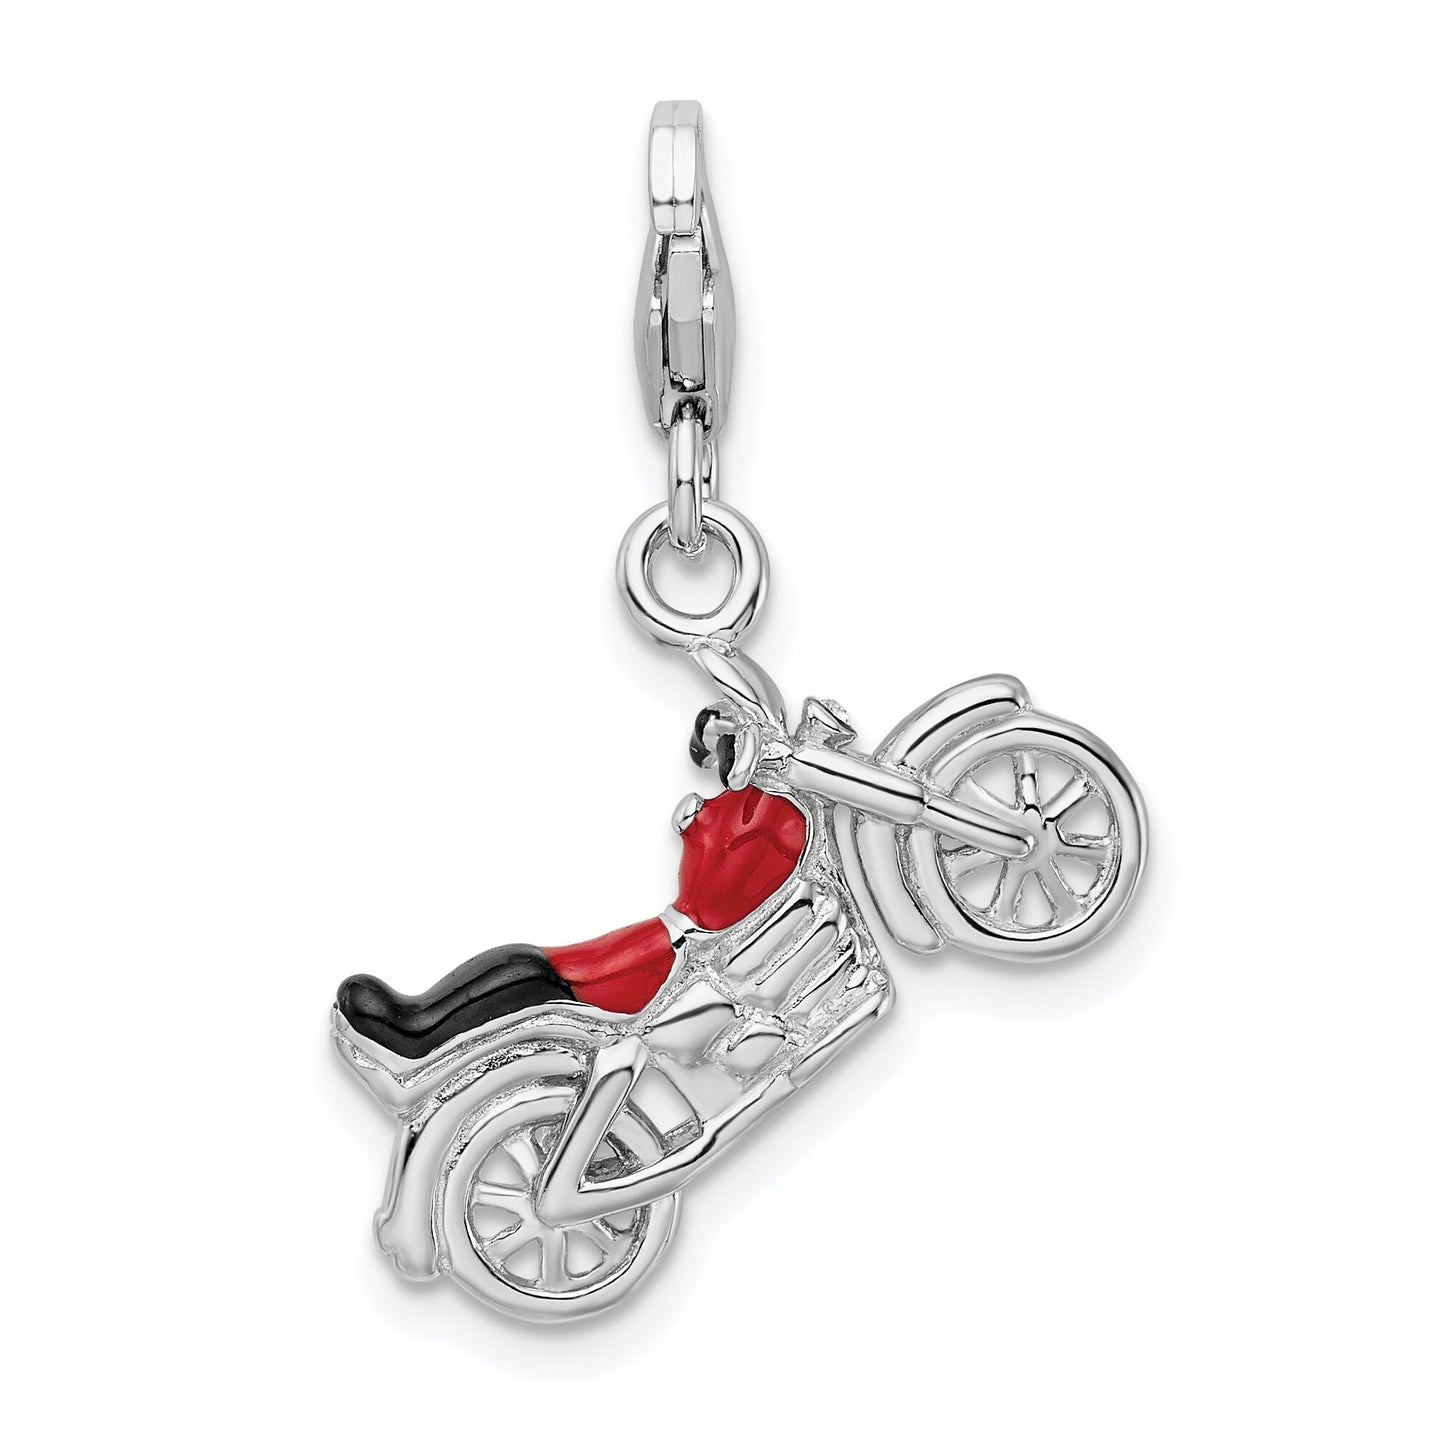 Sterling Silver Enameled Motorcycle Lobster Clasp Charm